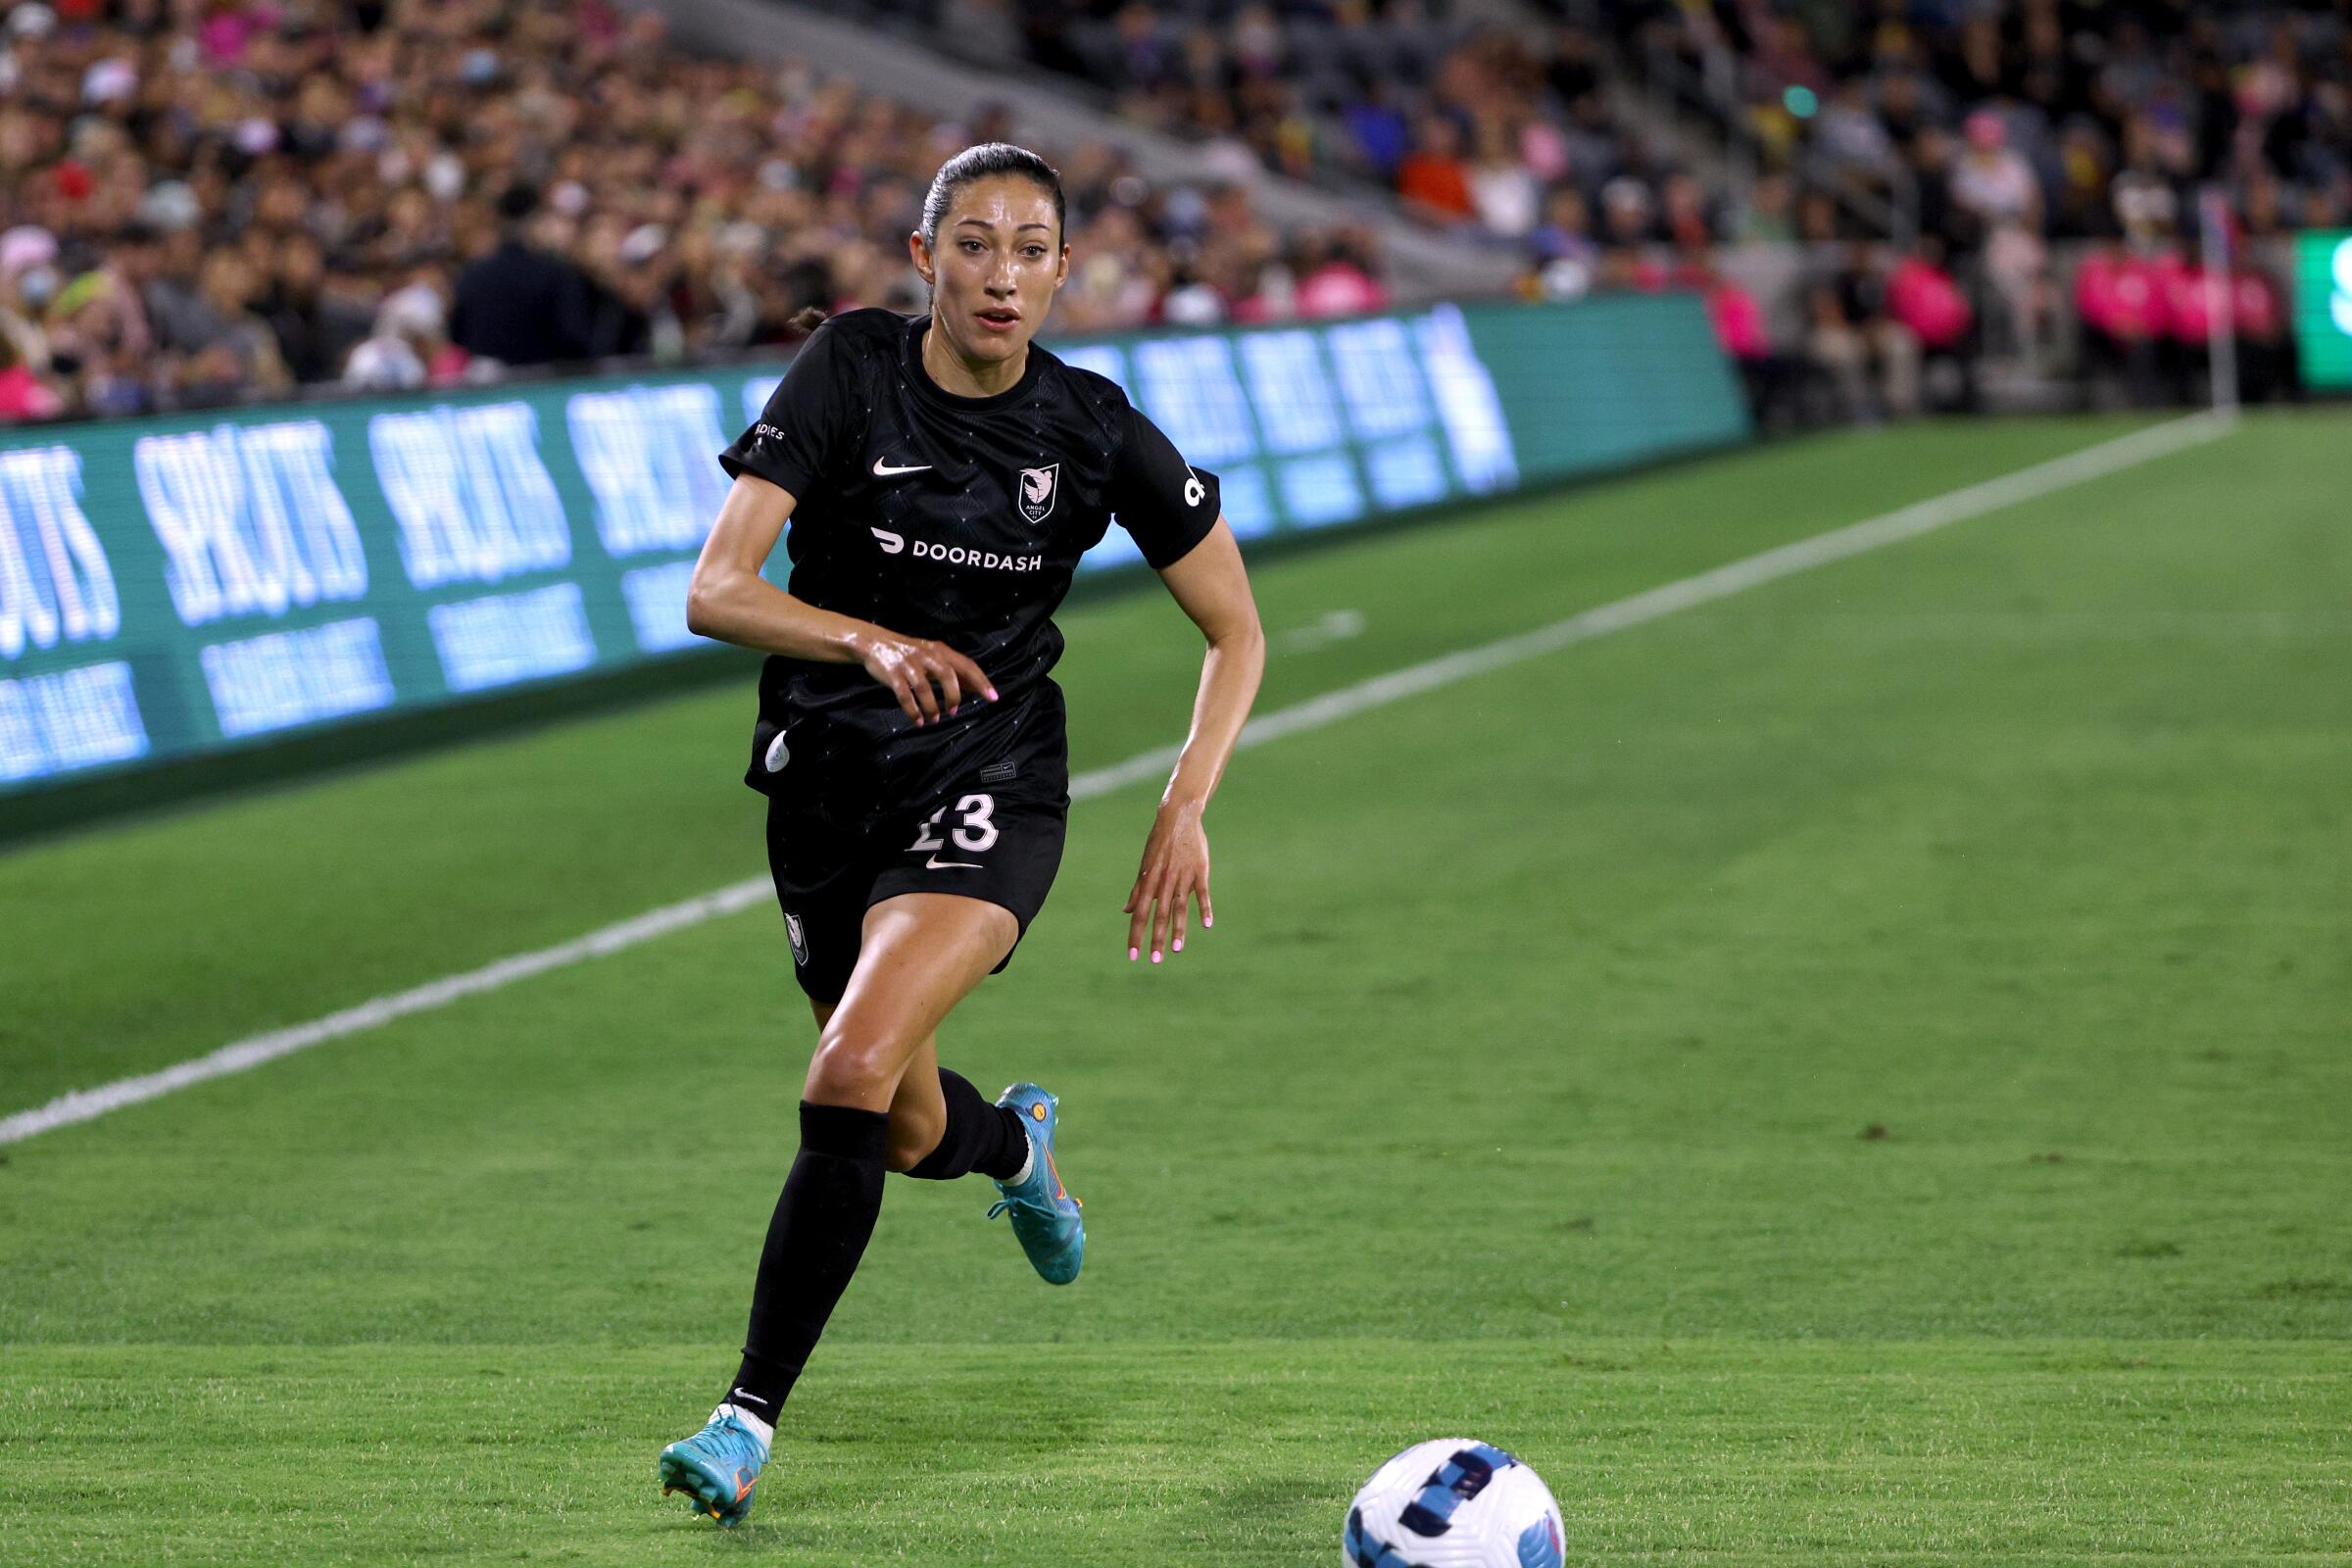 Angel City's Christen Press controls the ball during a match at BMO Stadium in 2022.